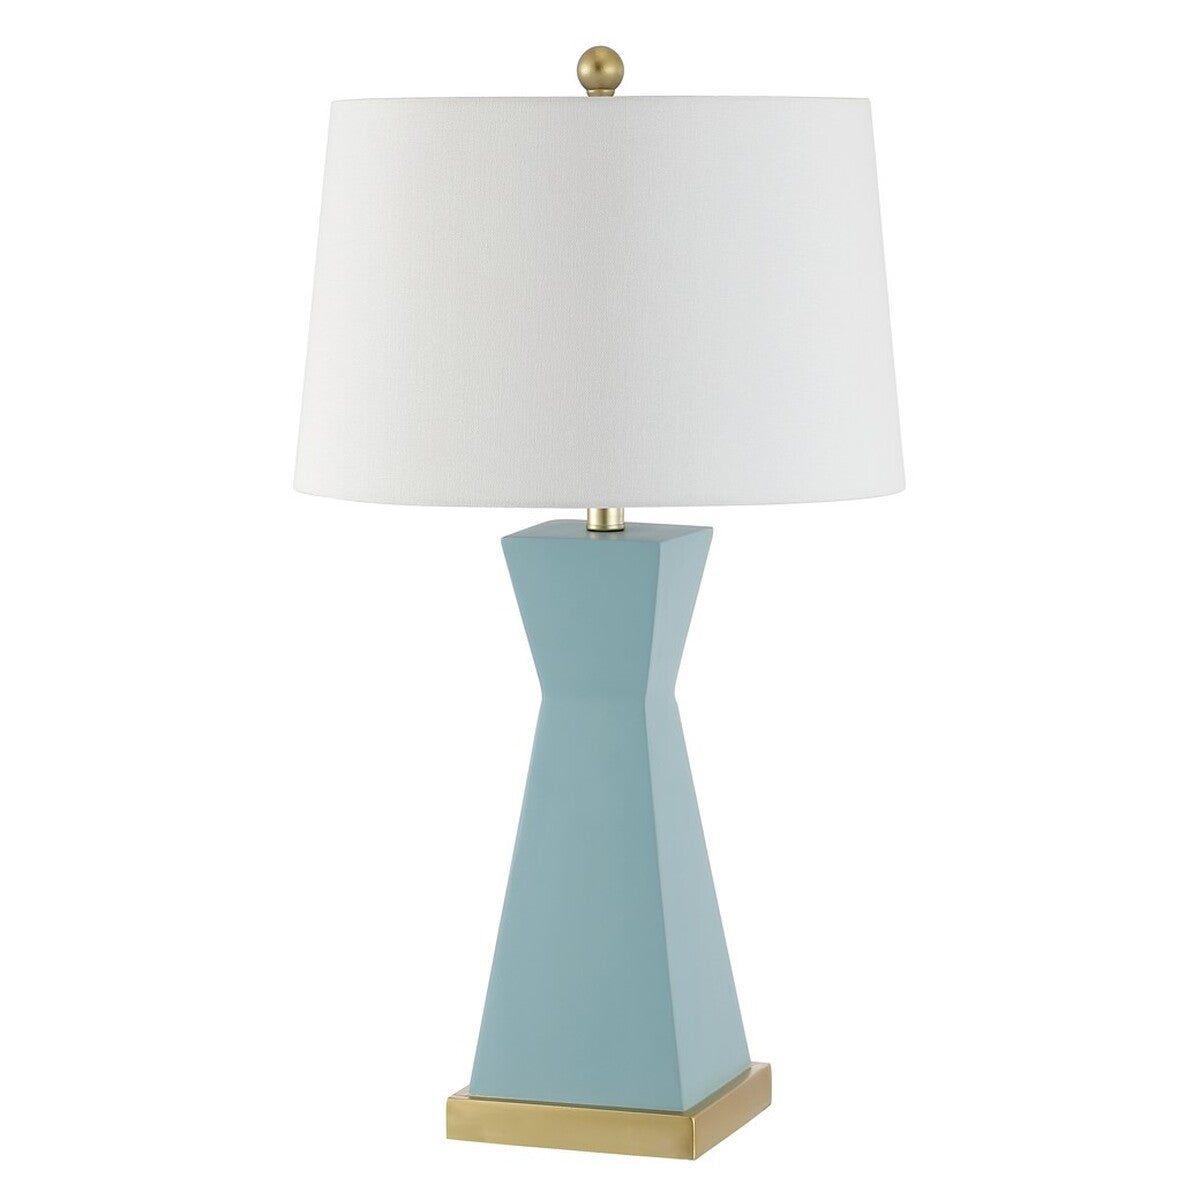 Set of Two Sky Blue Hourglass Table Lamps by Kevin Francis Design | Luxury Home Decor